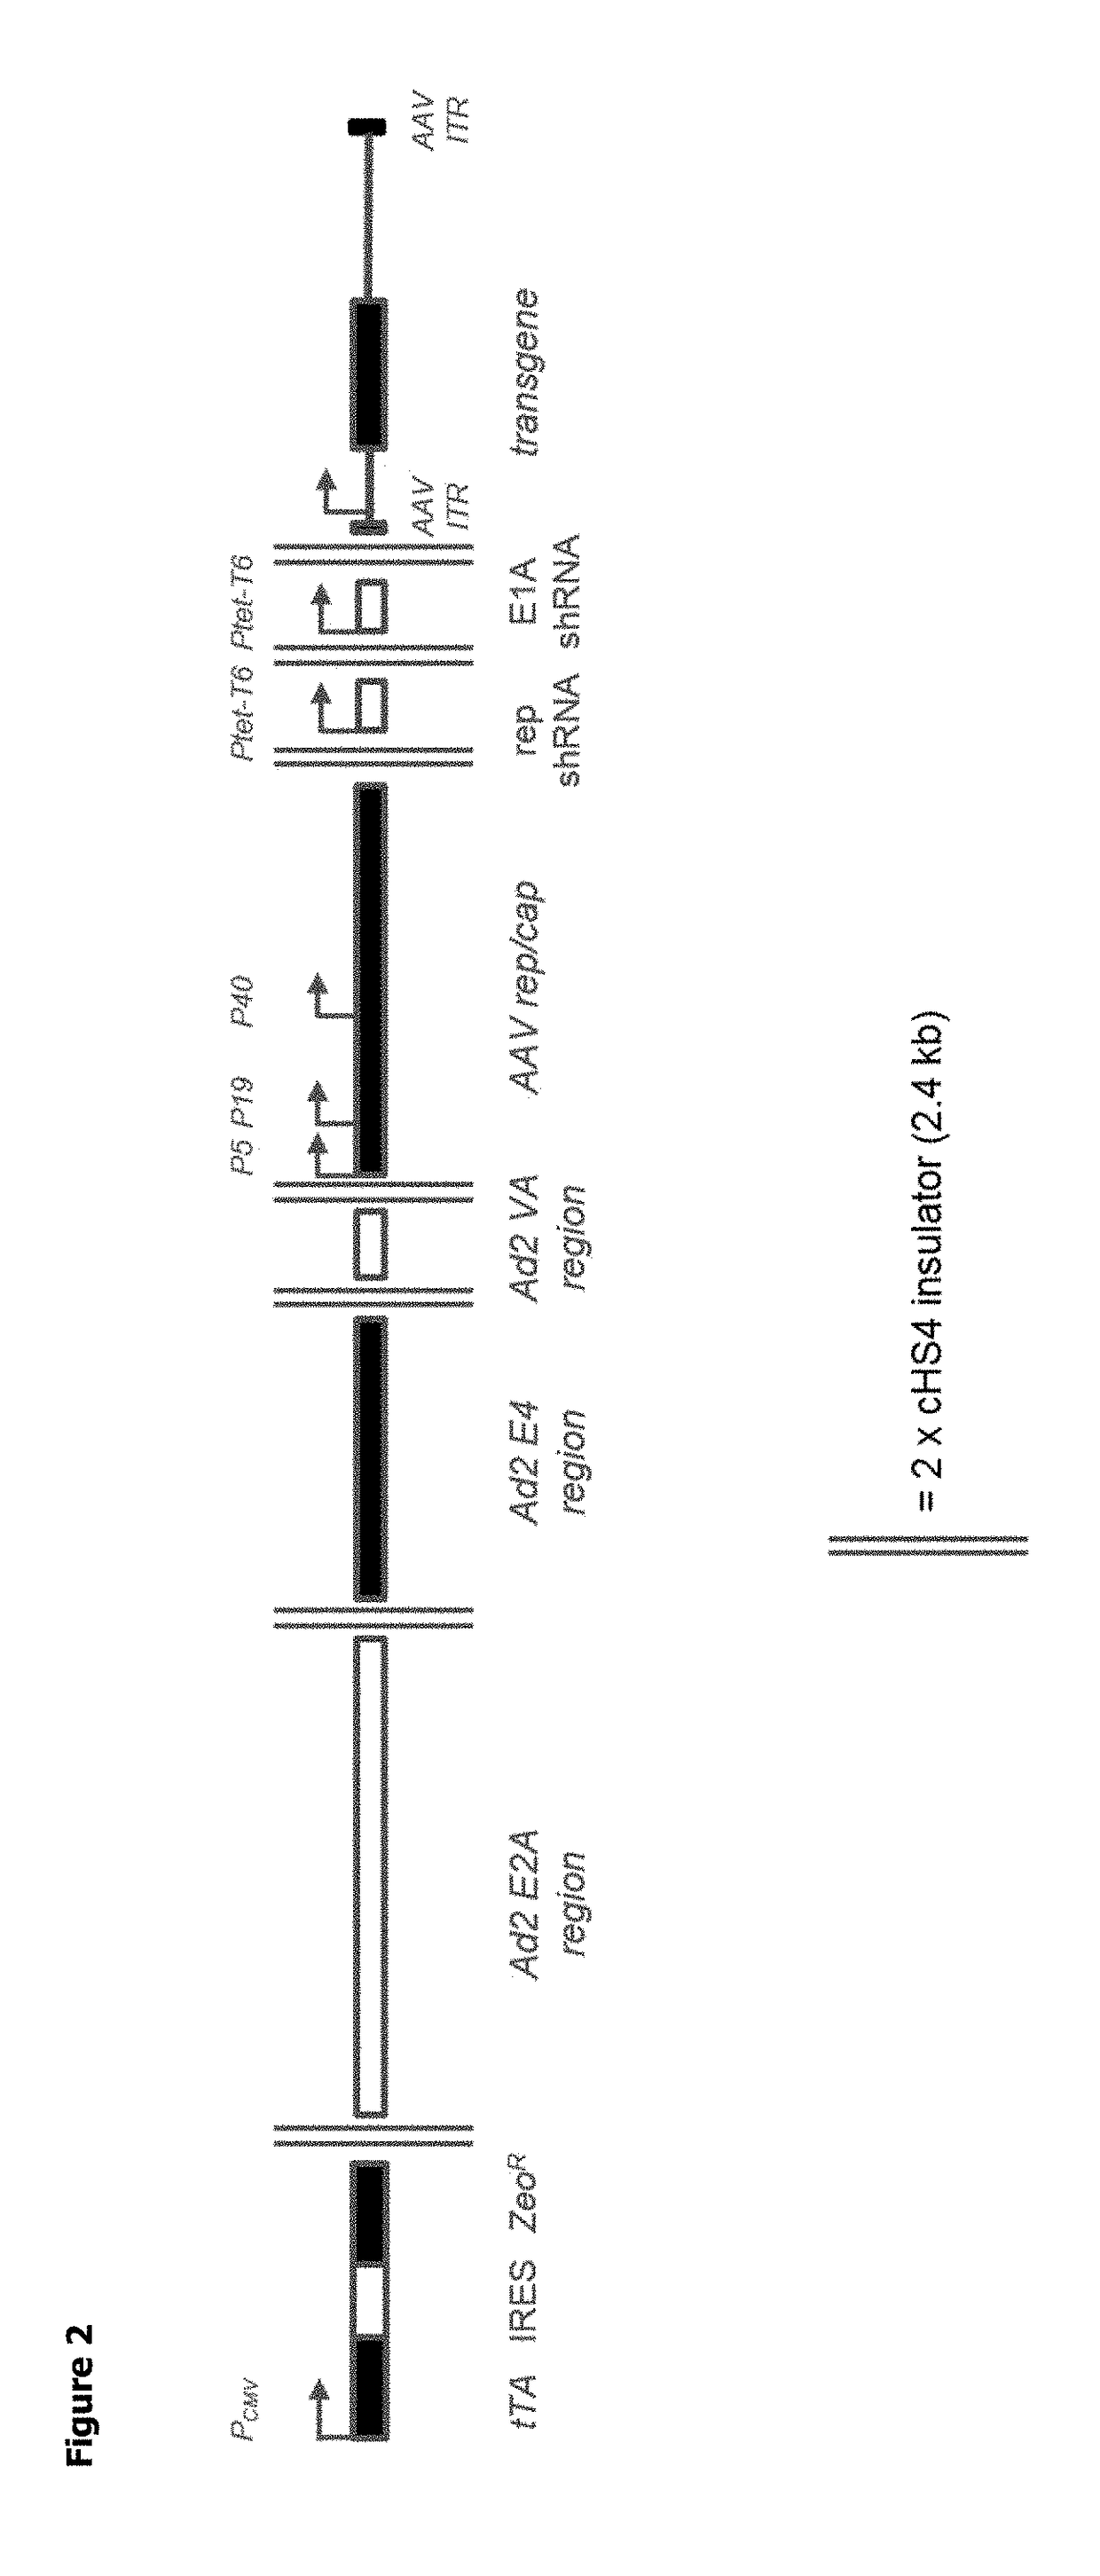 Methods for Adeno-Associated Viral Vector Production